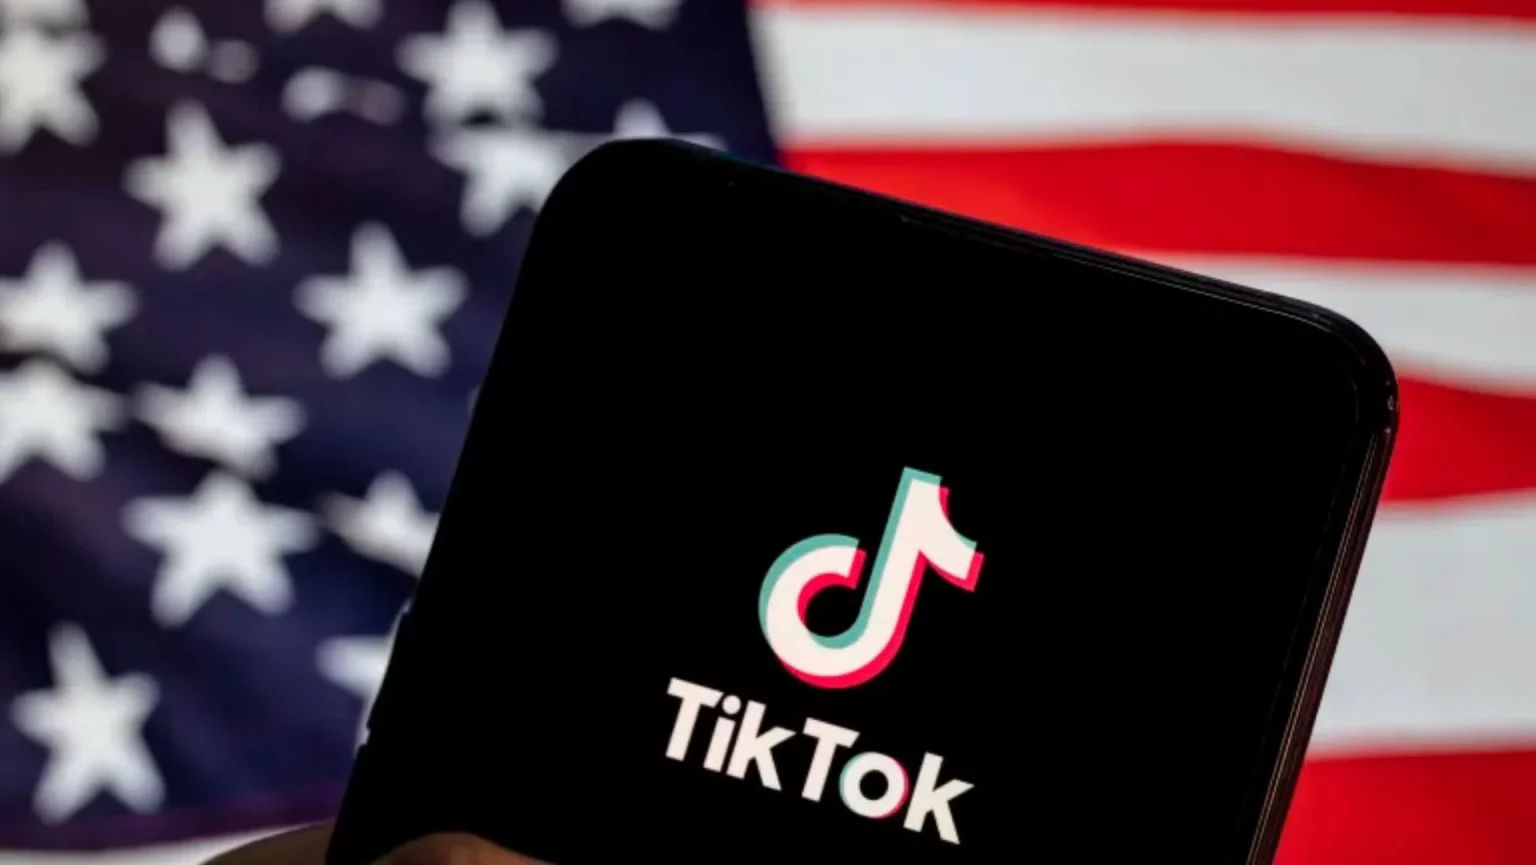 why-does-the-us-want-to-ban-tiktok